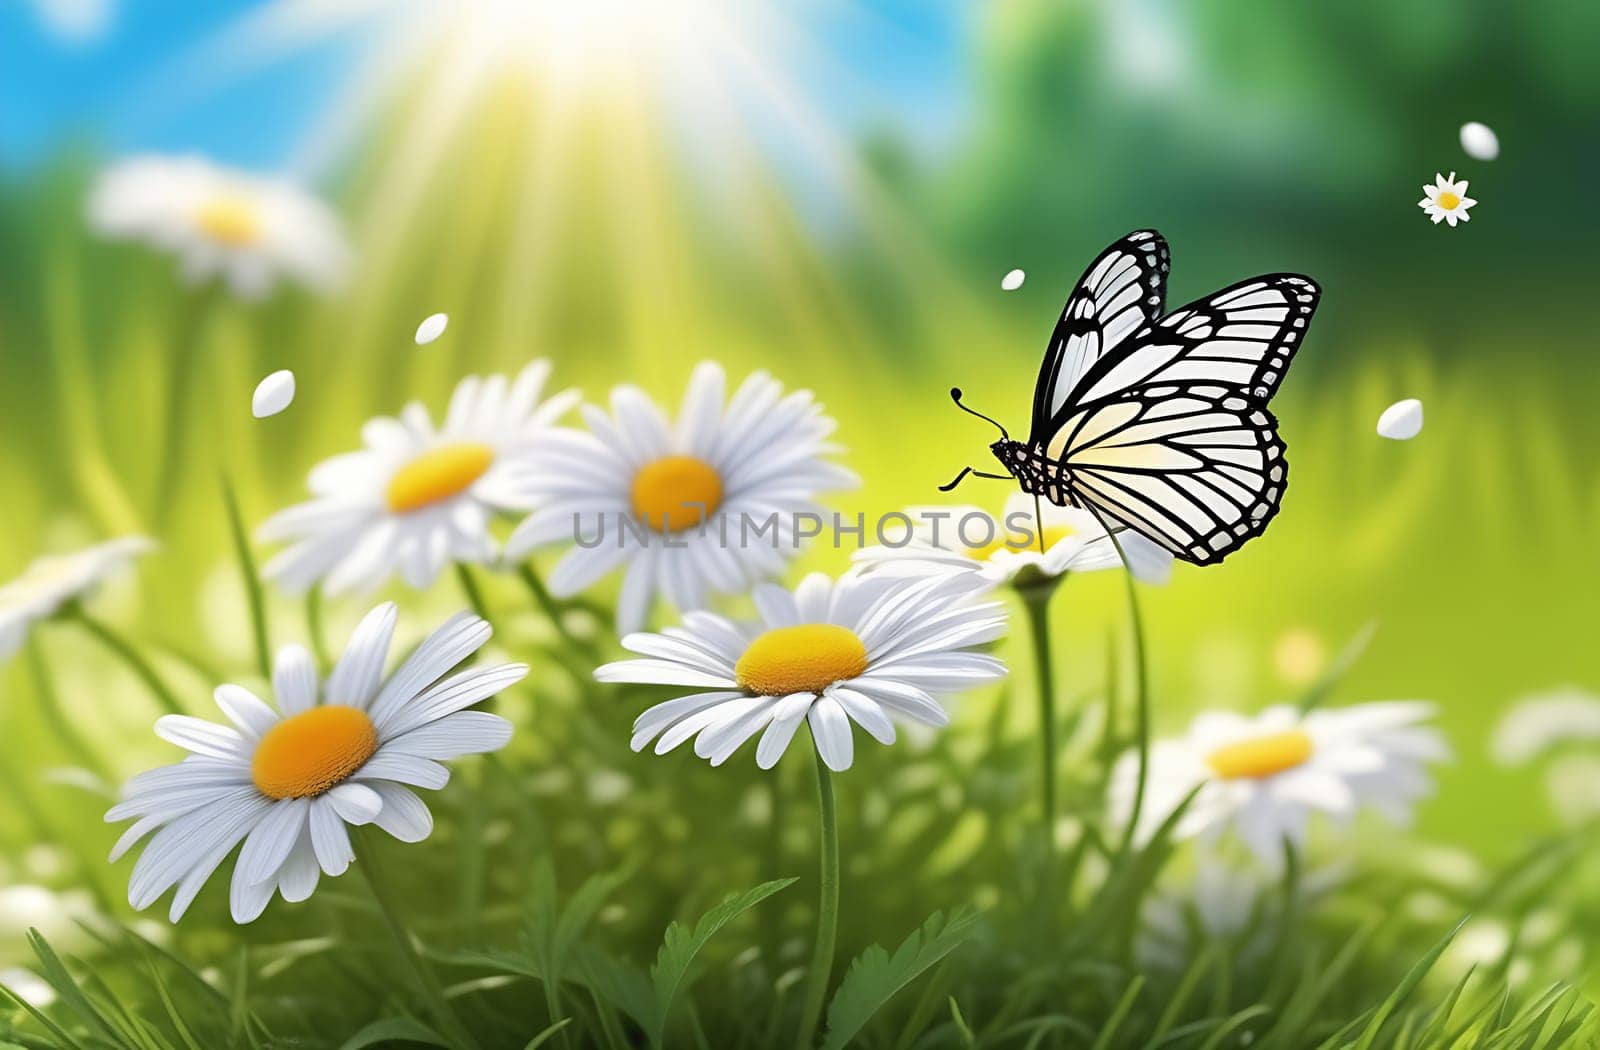 Cute summer illustration of a summer meadow, a butterfly sitting on a daisy flower, sunlight on a blue sky background, close-up by claire_lucia